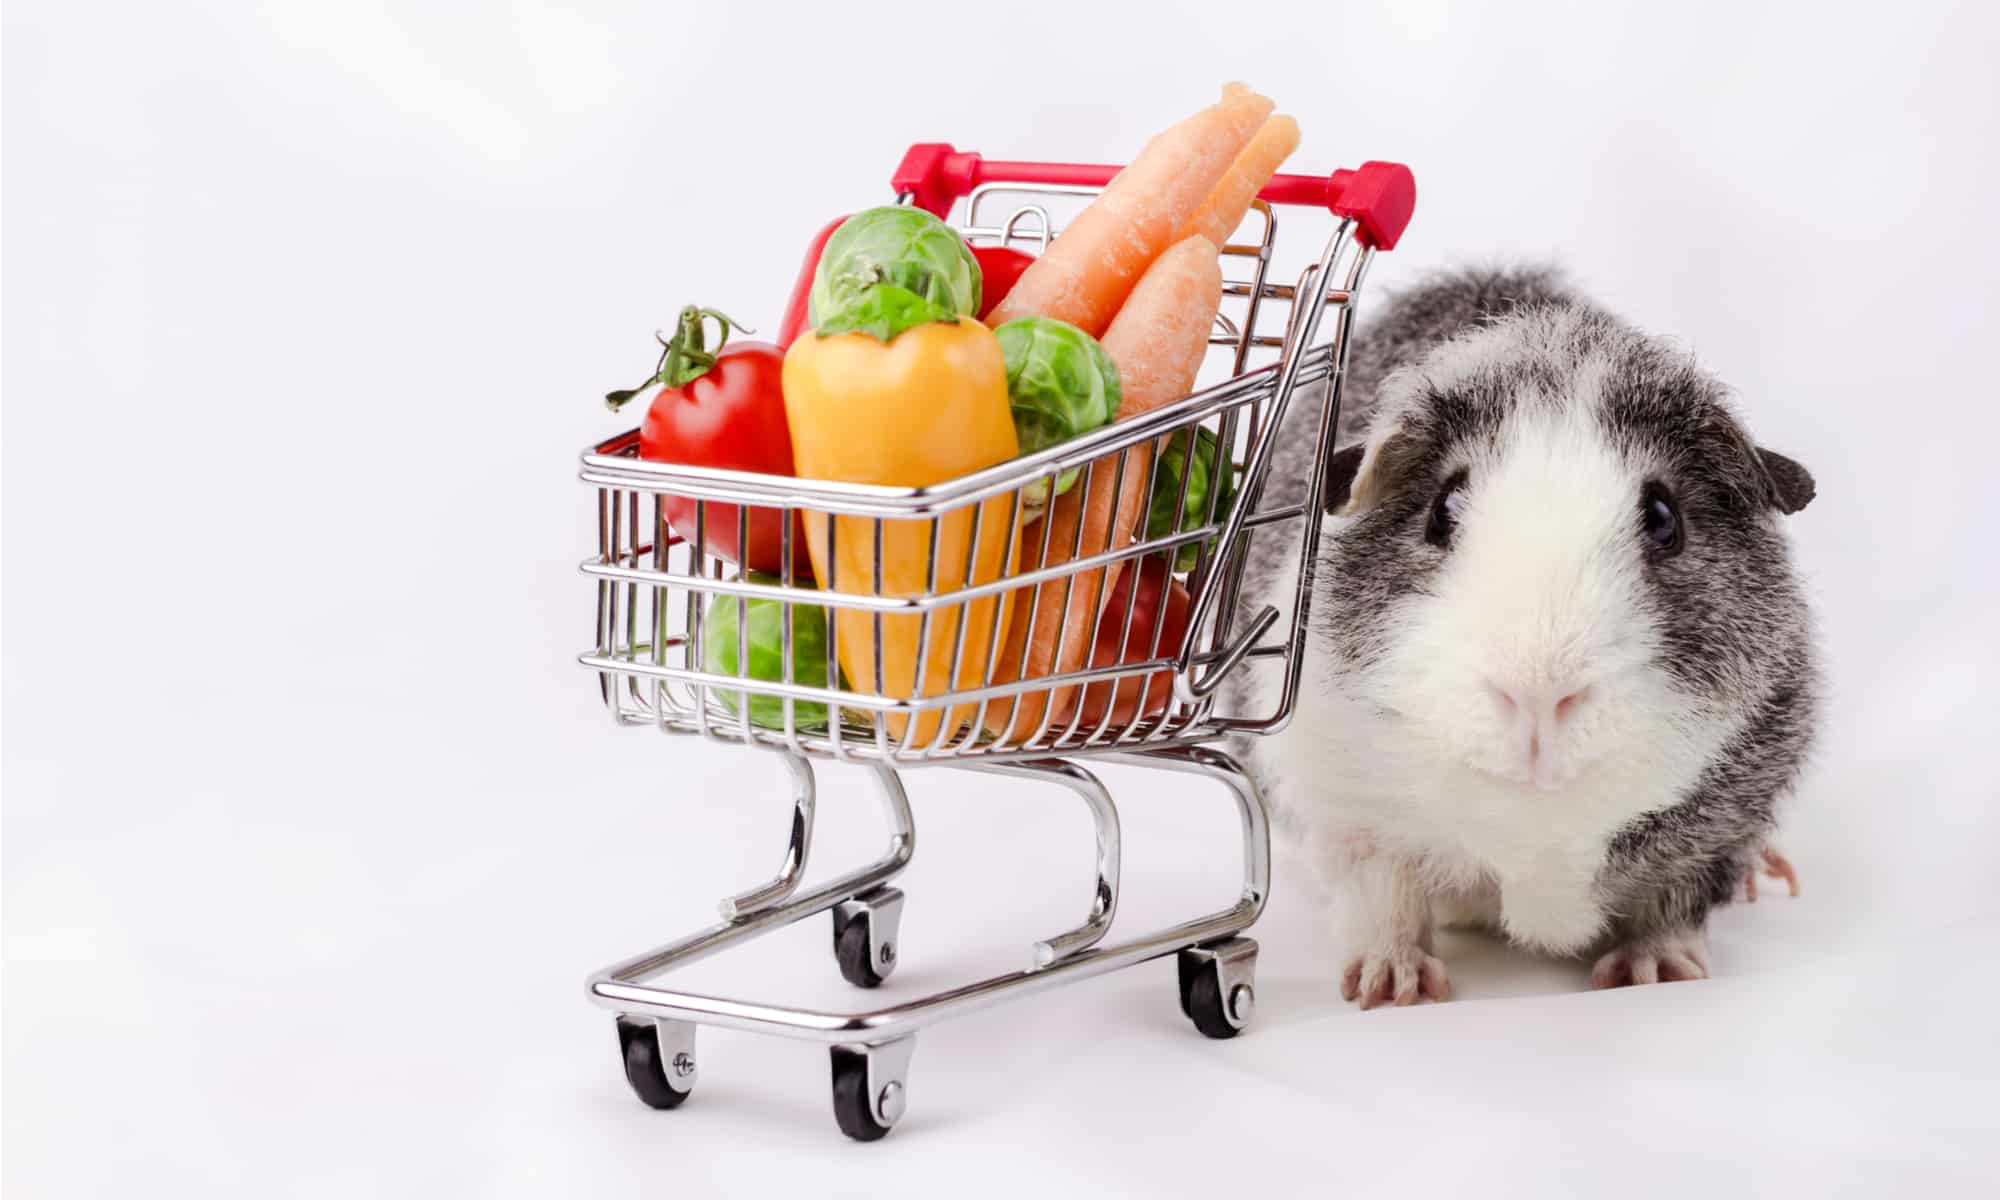 What Vegetables Can Guinea Pigs Have